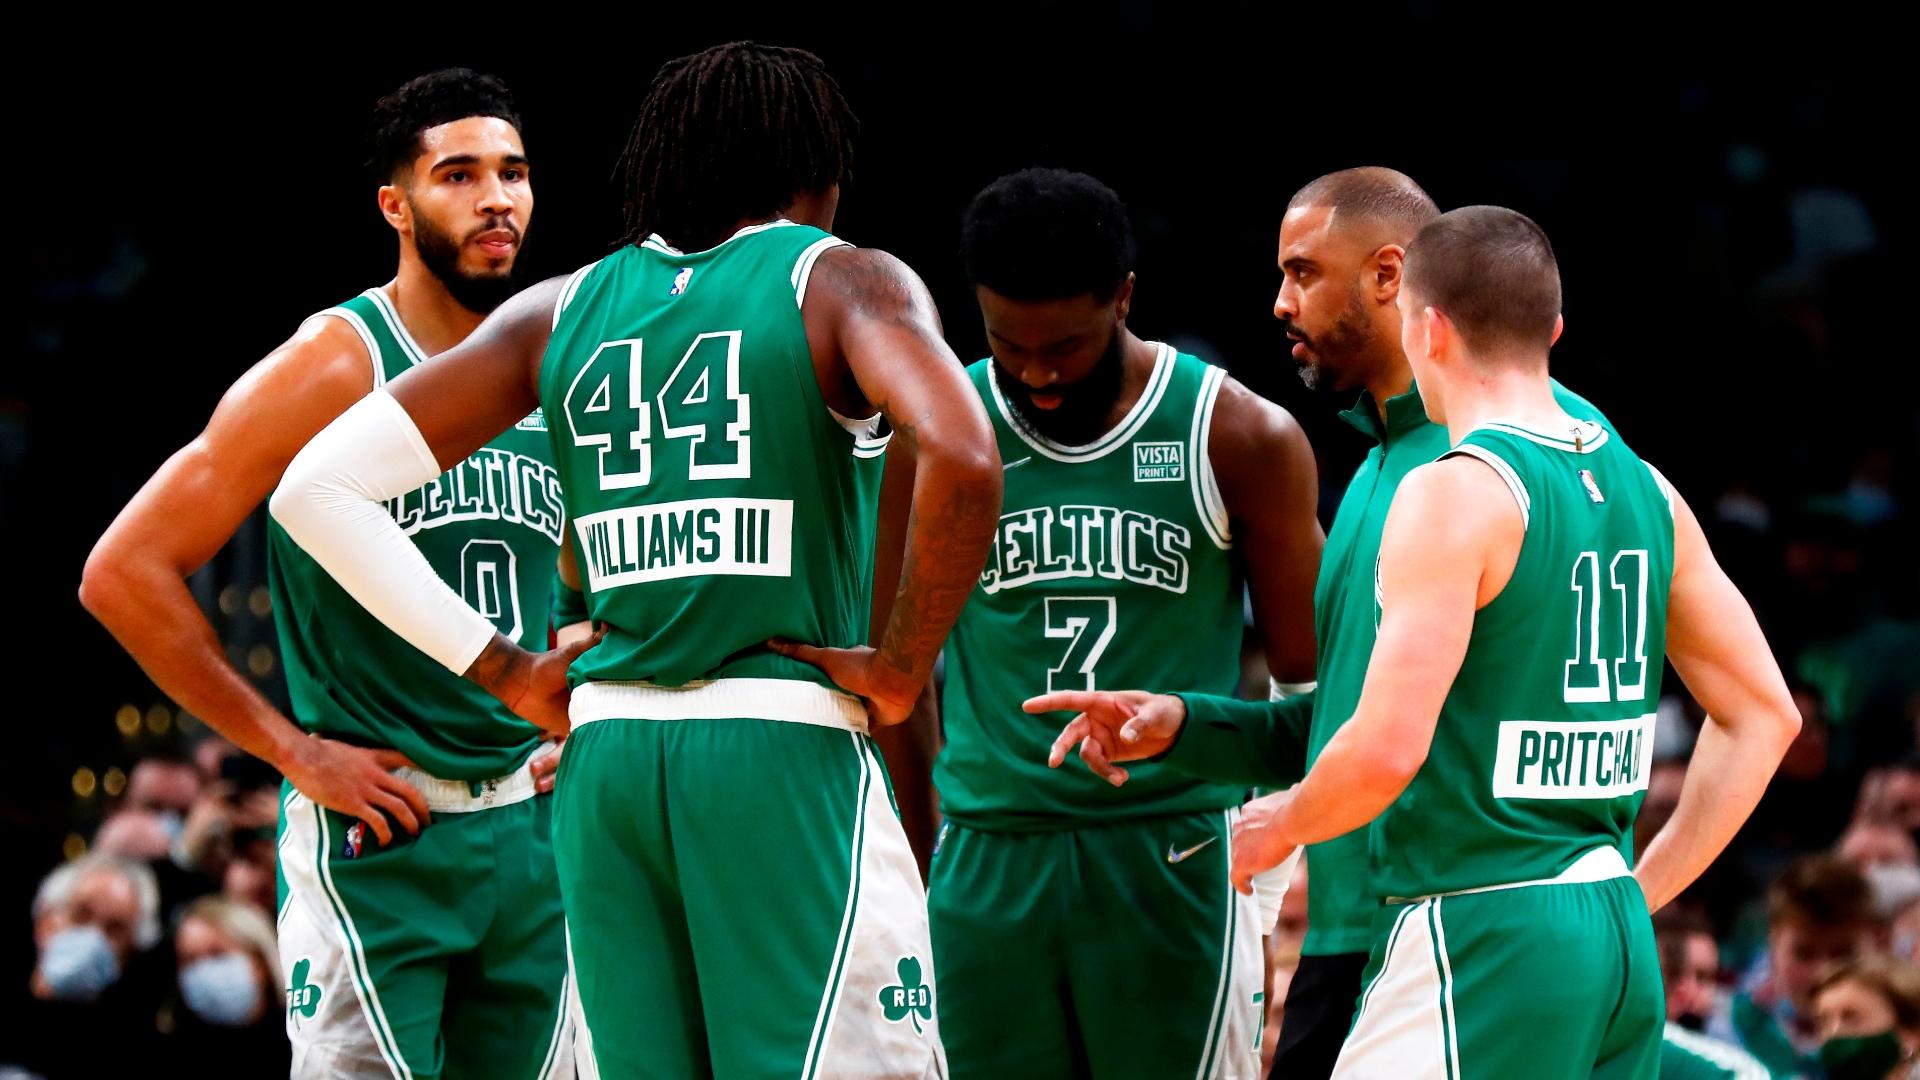 Surging Celtics Continue Red Hot Playoff Push, Win Sixth Straight With Blowout Win Against Nets